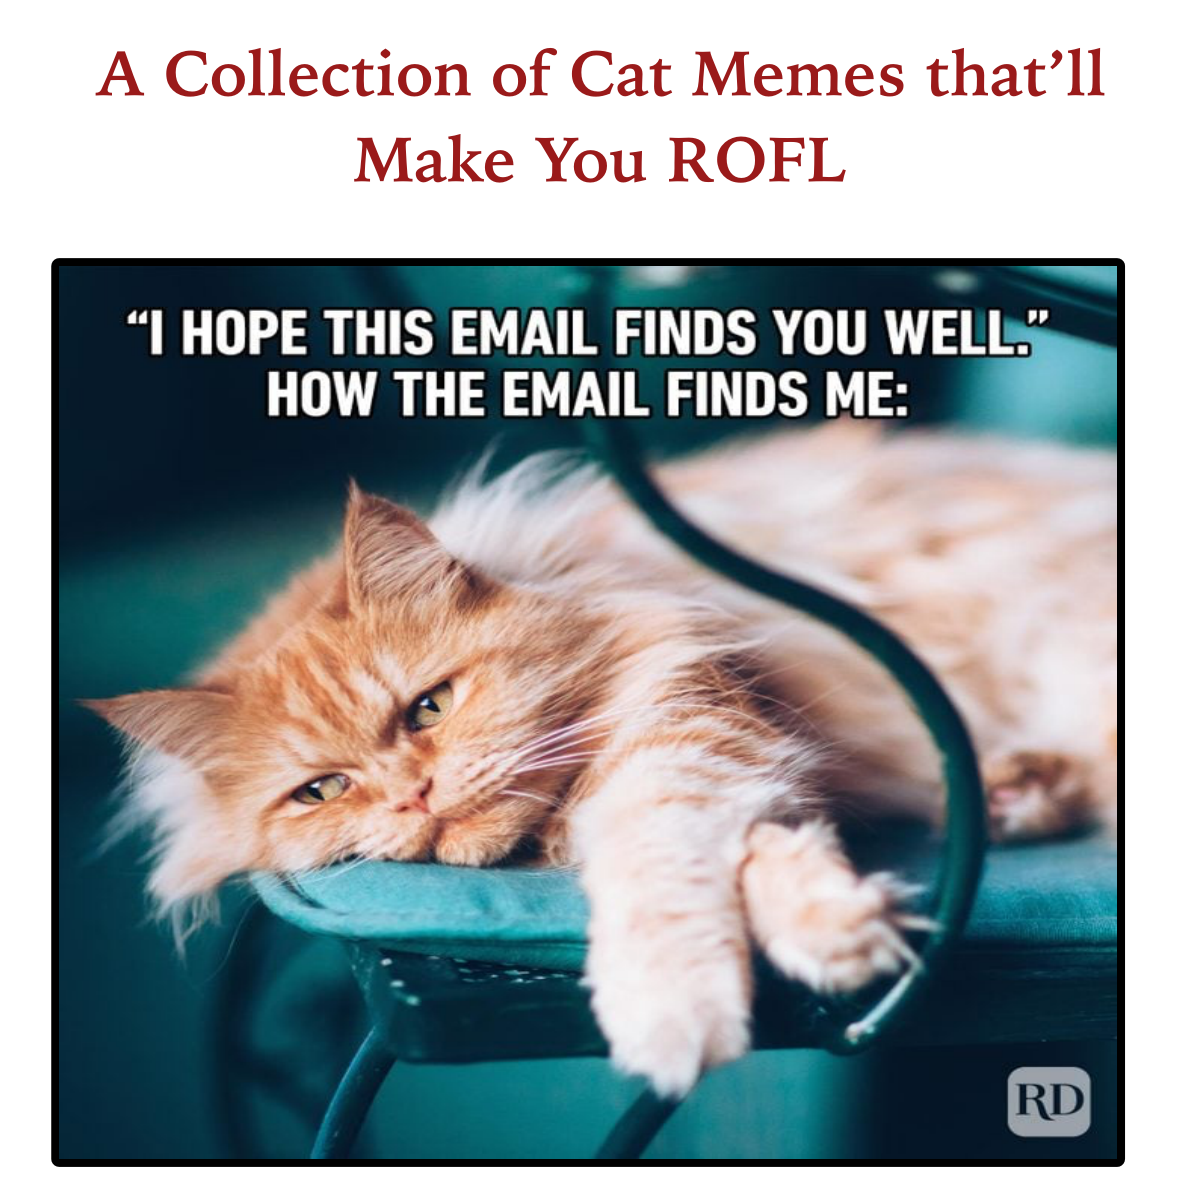 Feline Funnies: A Collection of Cat Memes that’ll Make You ROFL